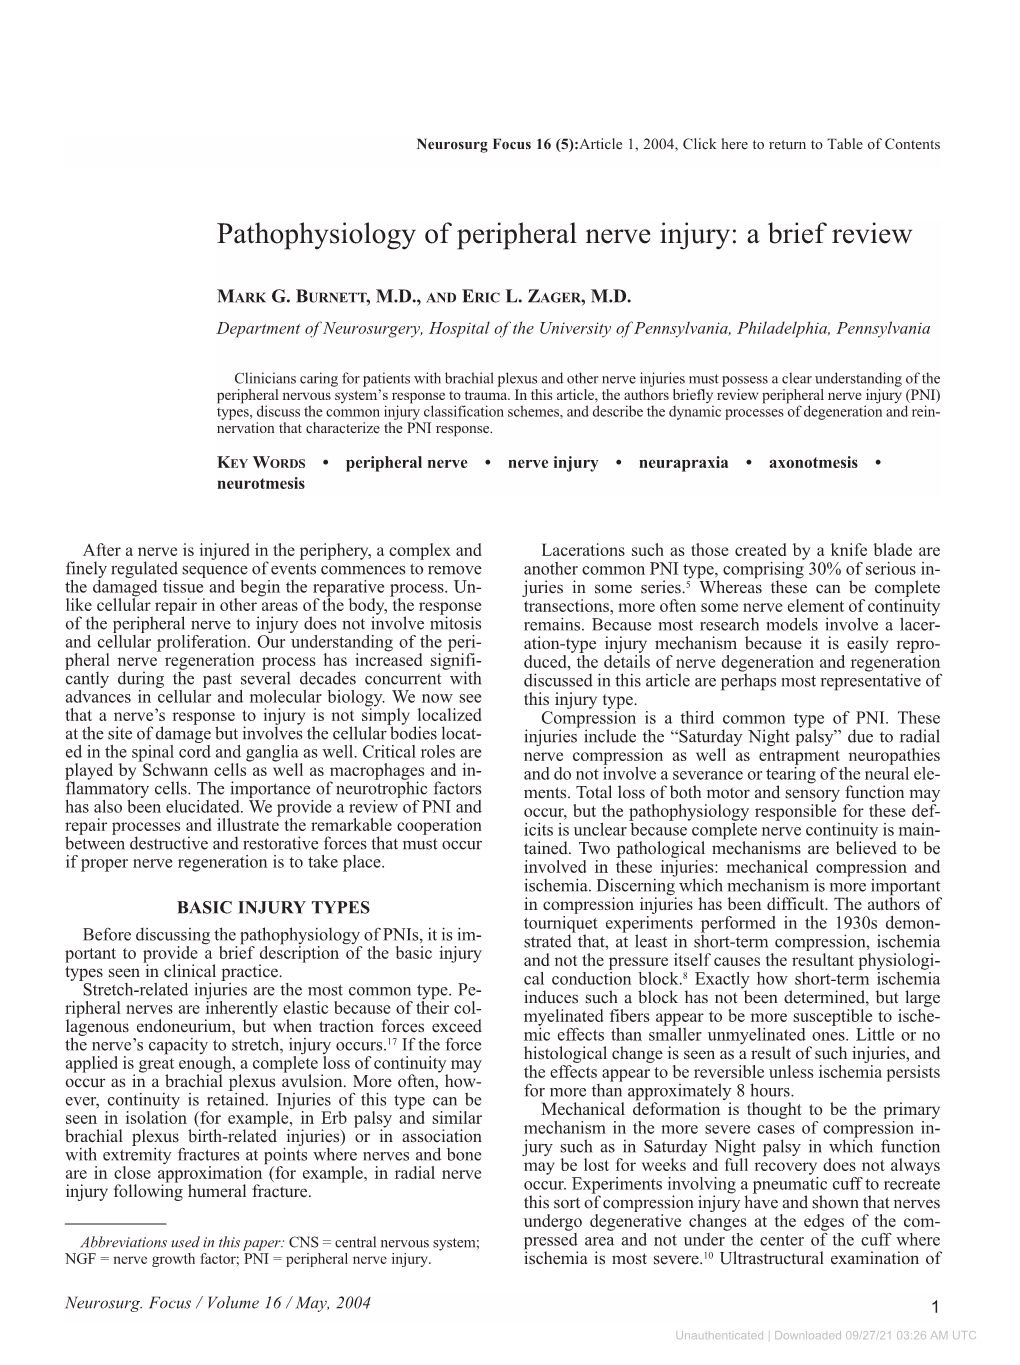 Pathophysiology of Peripheral Nerve Injury: a Brief Review